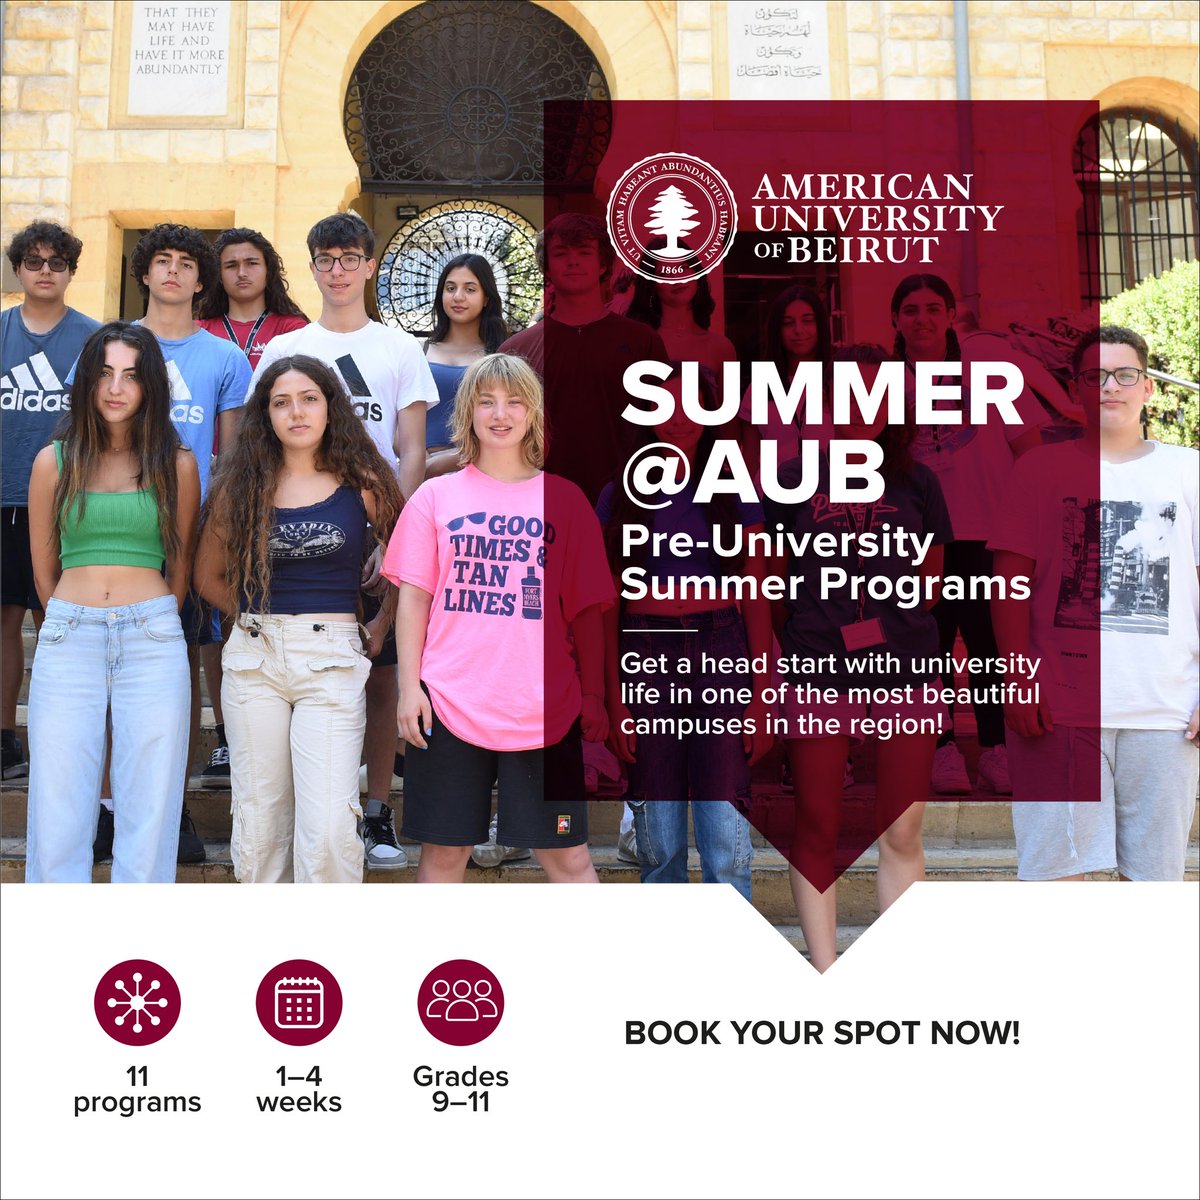 Calling all high school students! Are you ready to make the most of your summer? Join us at AUB's Pre-University Programs for an exciting academic adventure! Explore university life on our campus and get a head start on your future goals.